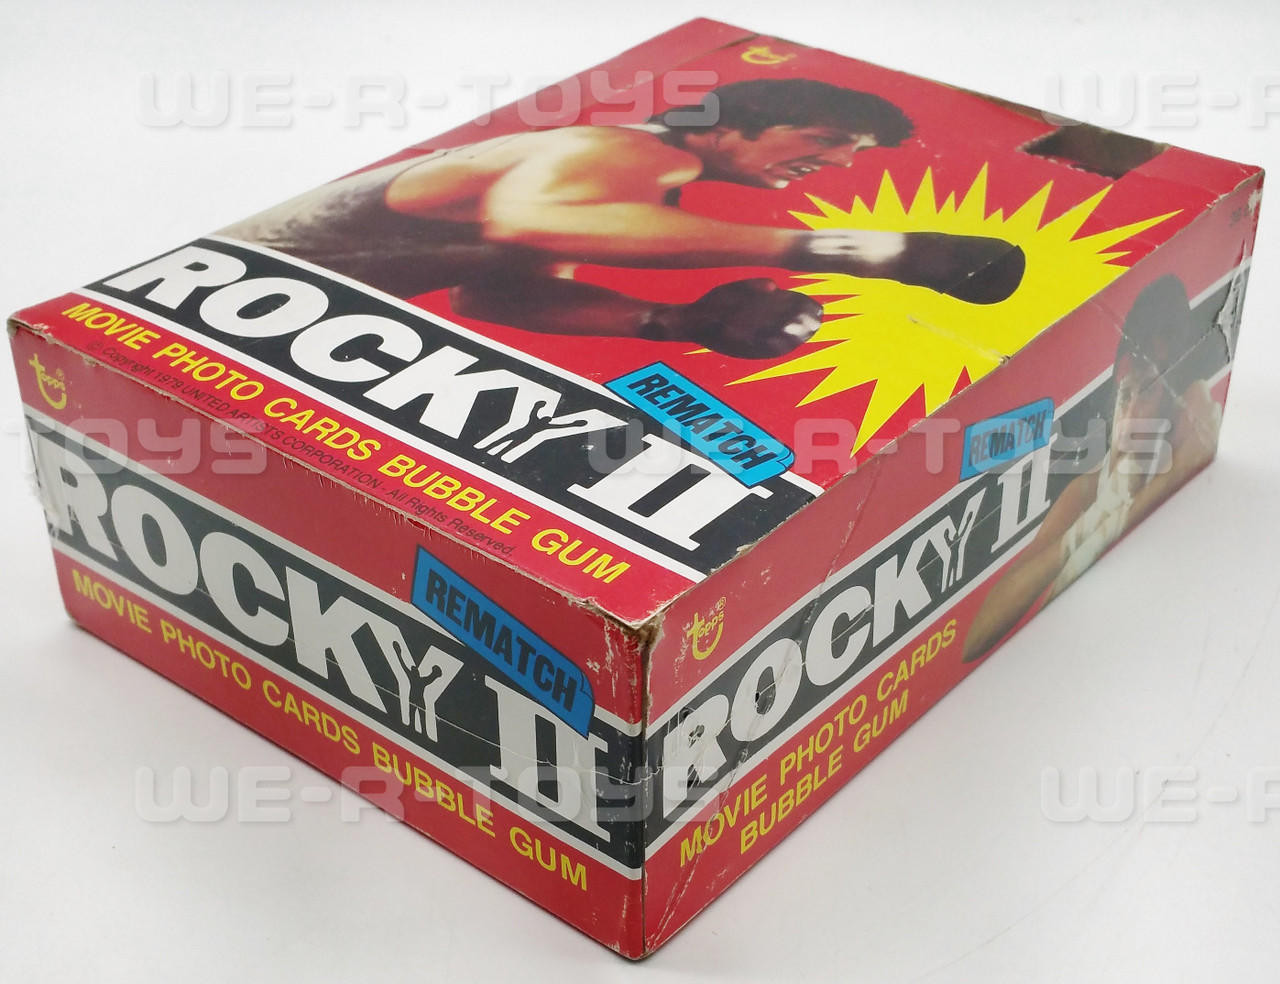 Rocky II Movie Photo Cards With Sticker and Gum Box of 35 Topps